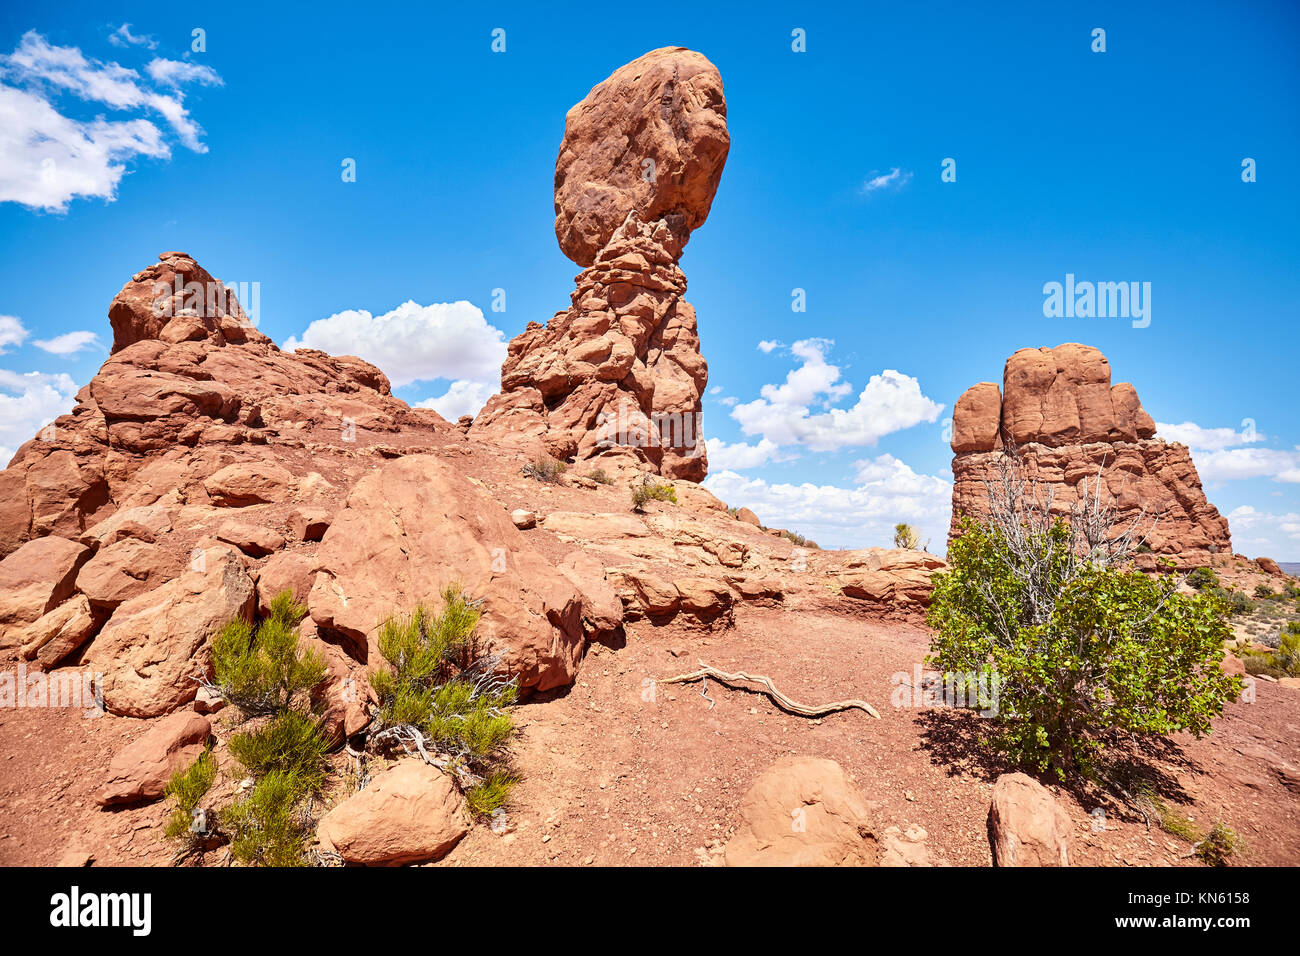 Rock formations in the Arches National Park, Utah, USA. Stock Photo